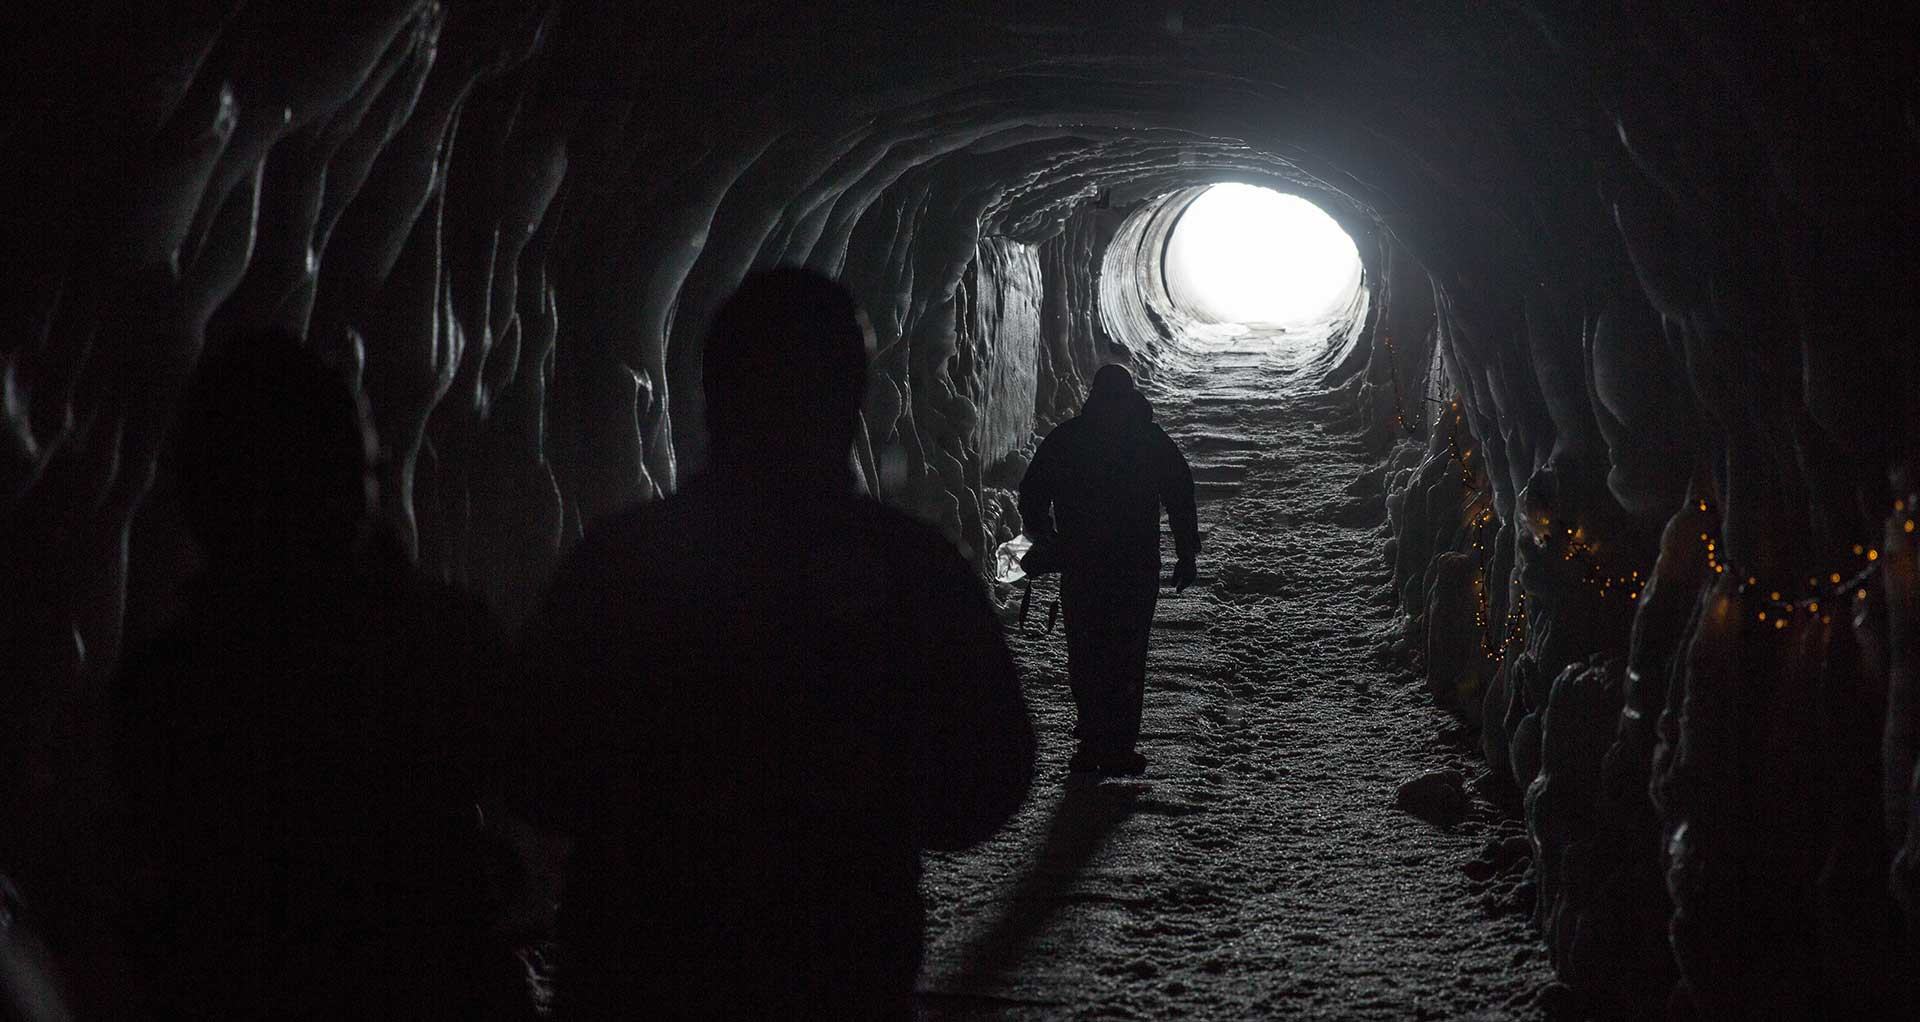 Men walking towards a light at the end of the tunnel.